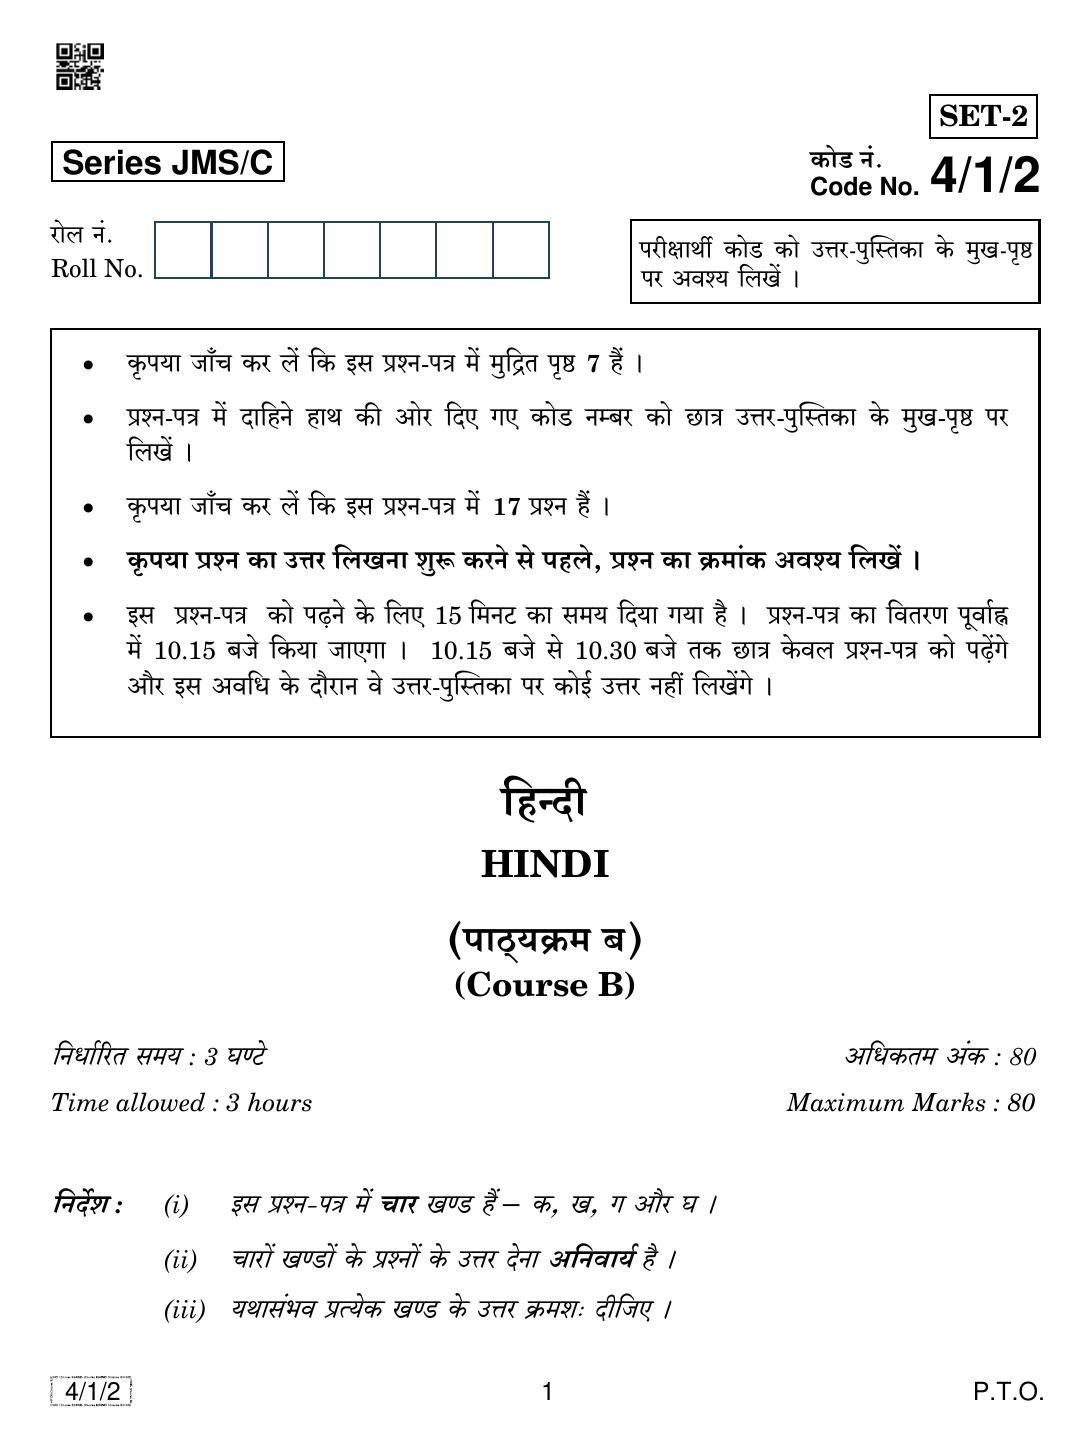 CBSE Class 10 4-1-2 HINDI B 2019 Compartment Question Paper - Page 1